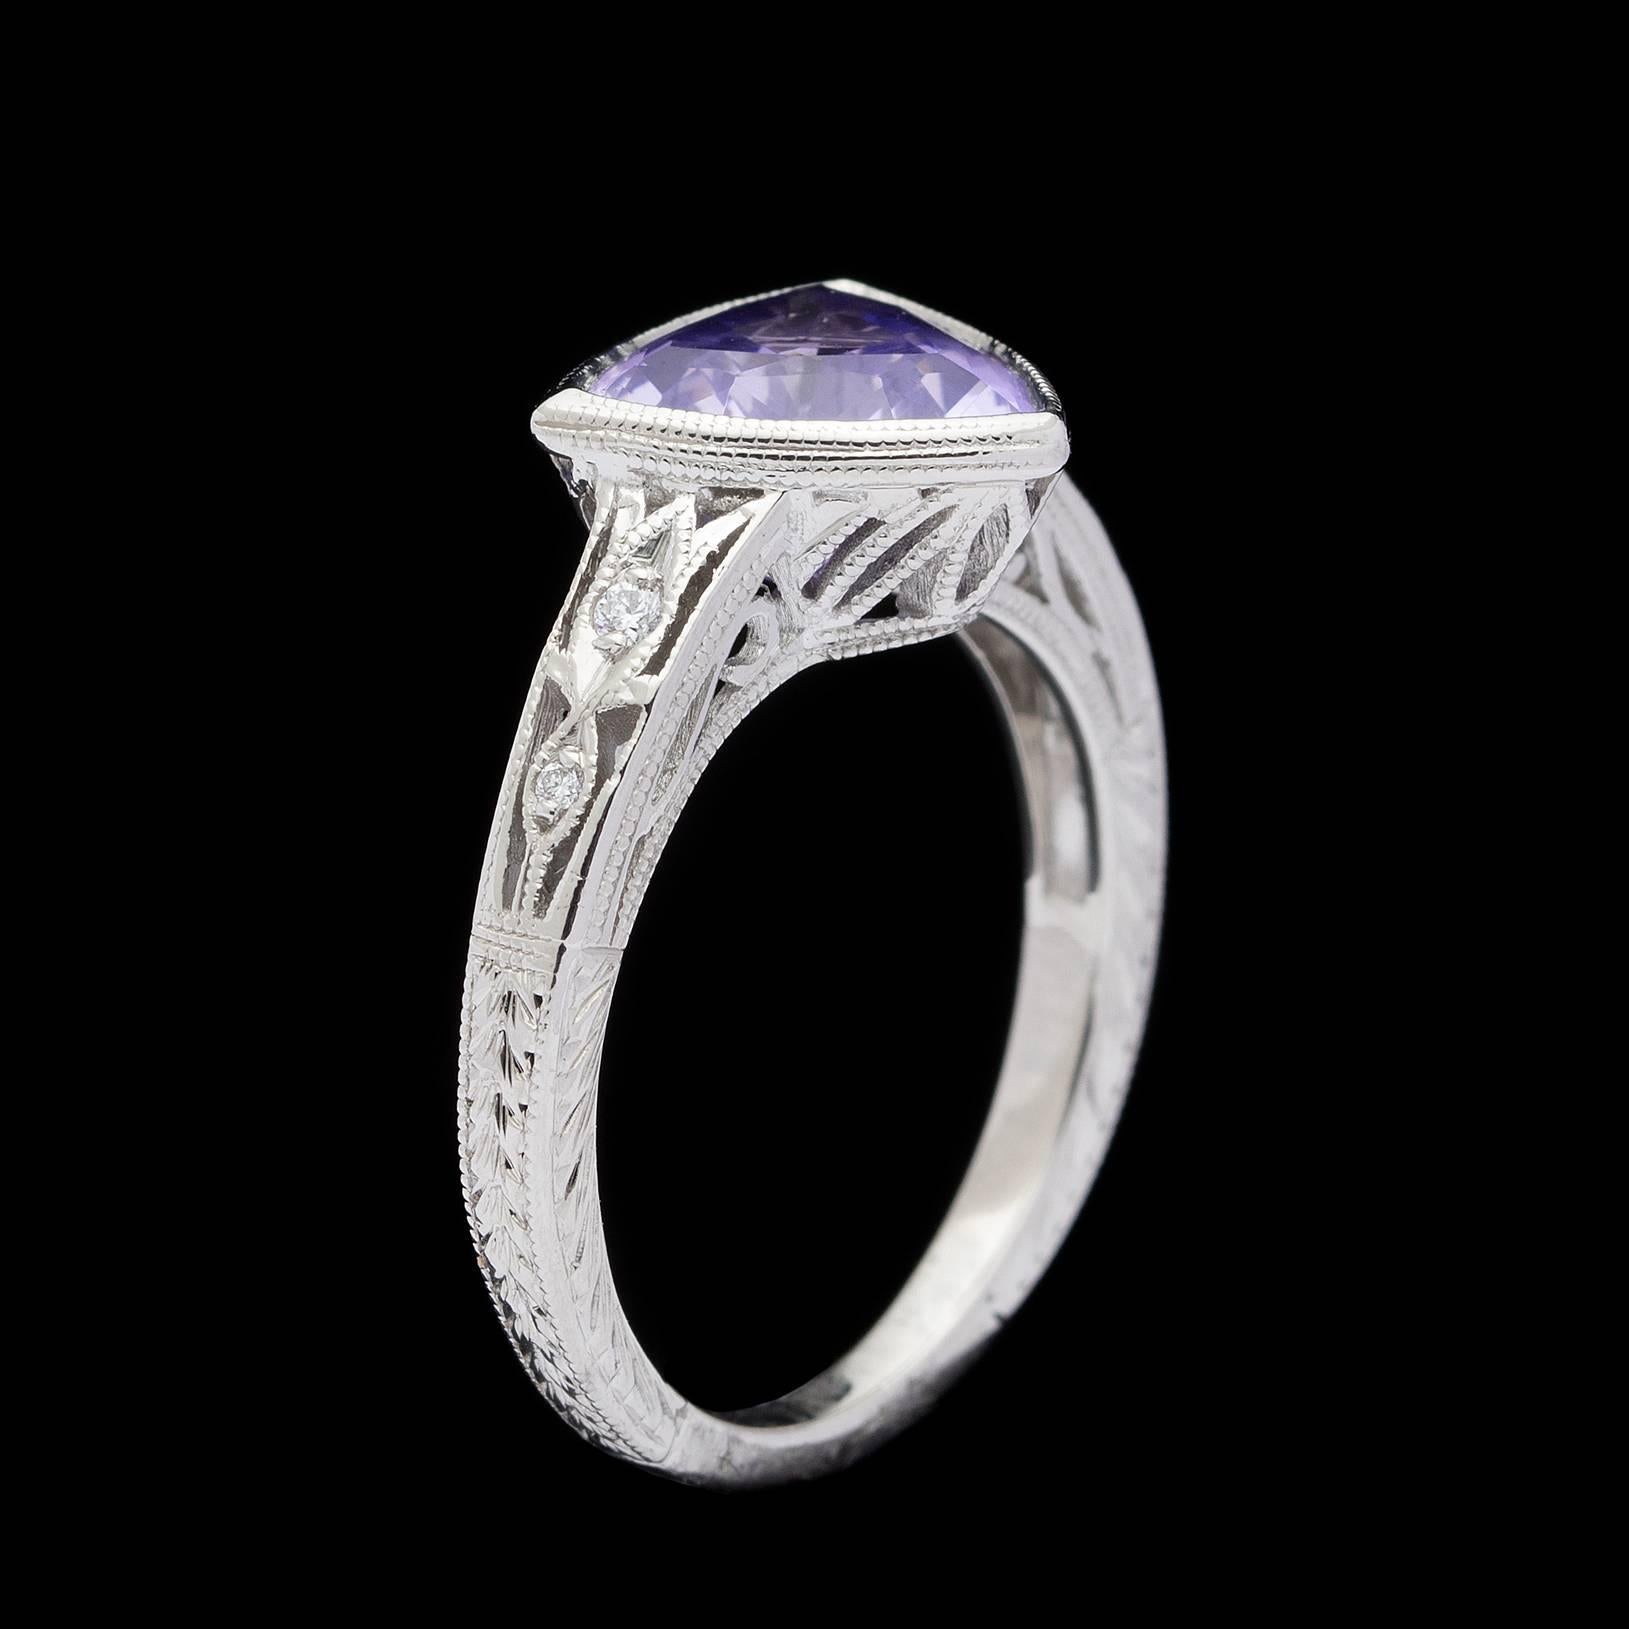 Art Deco Exceptional Unheated Natural Bluish Violet Sapphire 3.38 Carat Ring